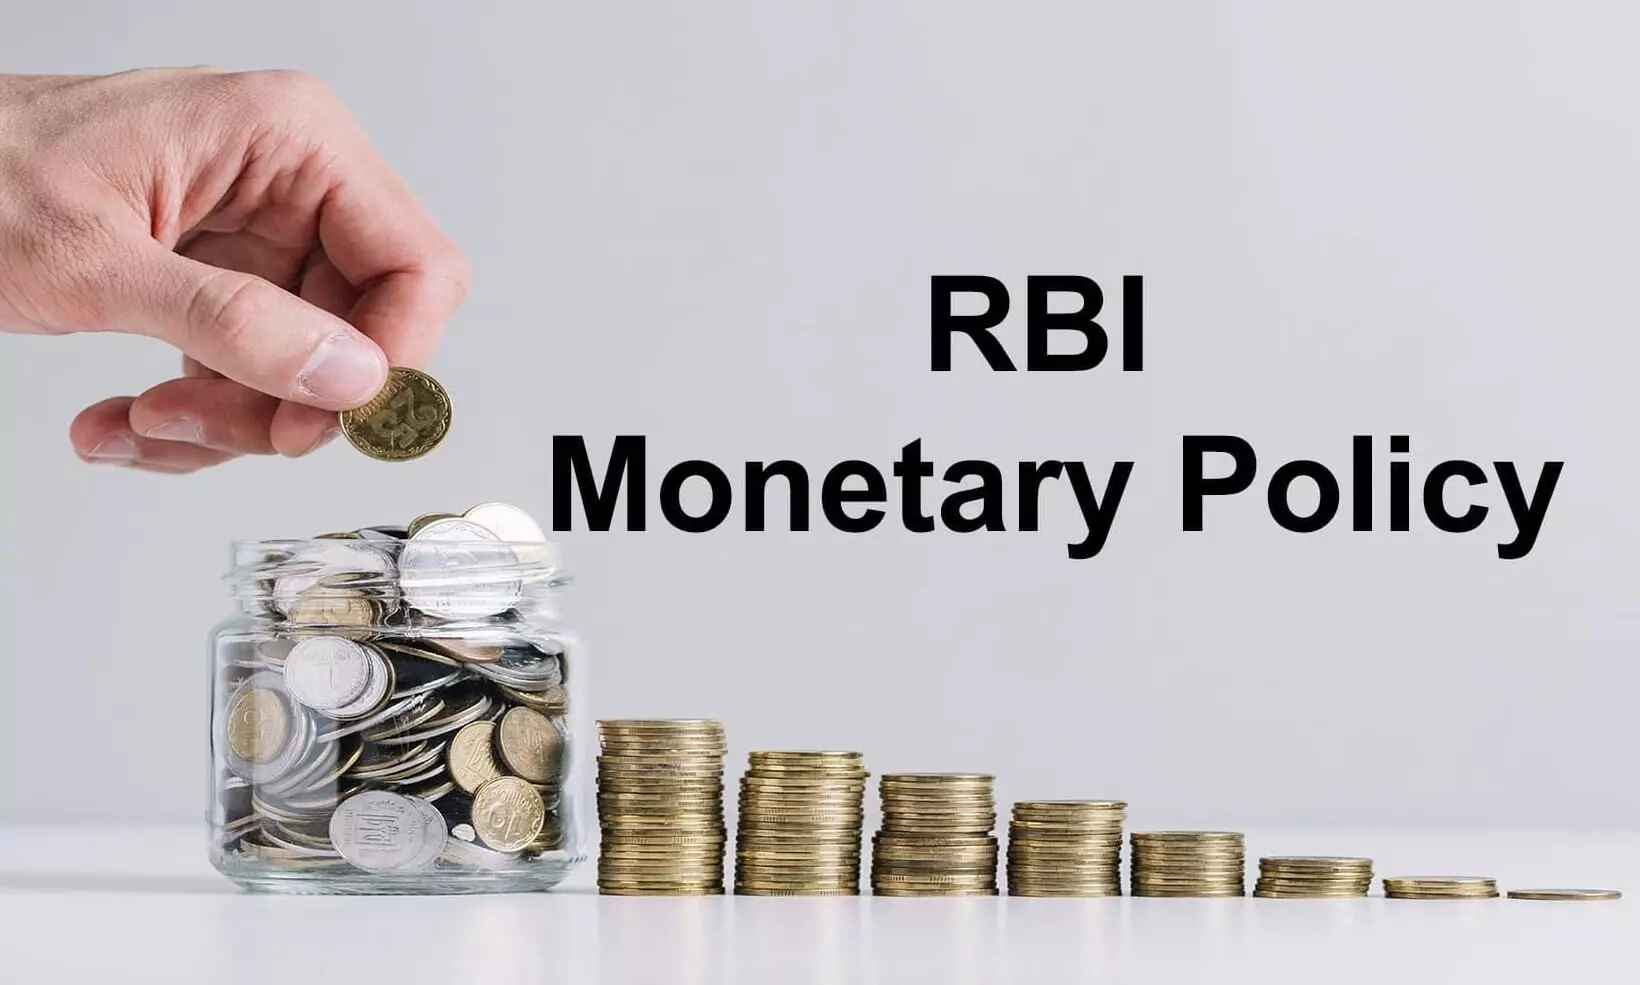 Repo rate to remain at 6.50%, RBI to focus on controlling inflation, supporting growth